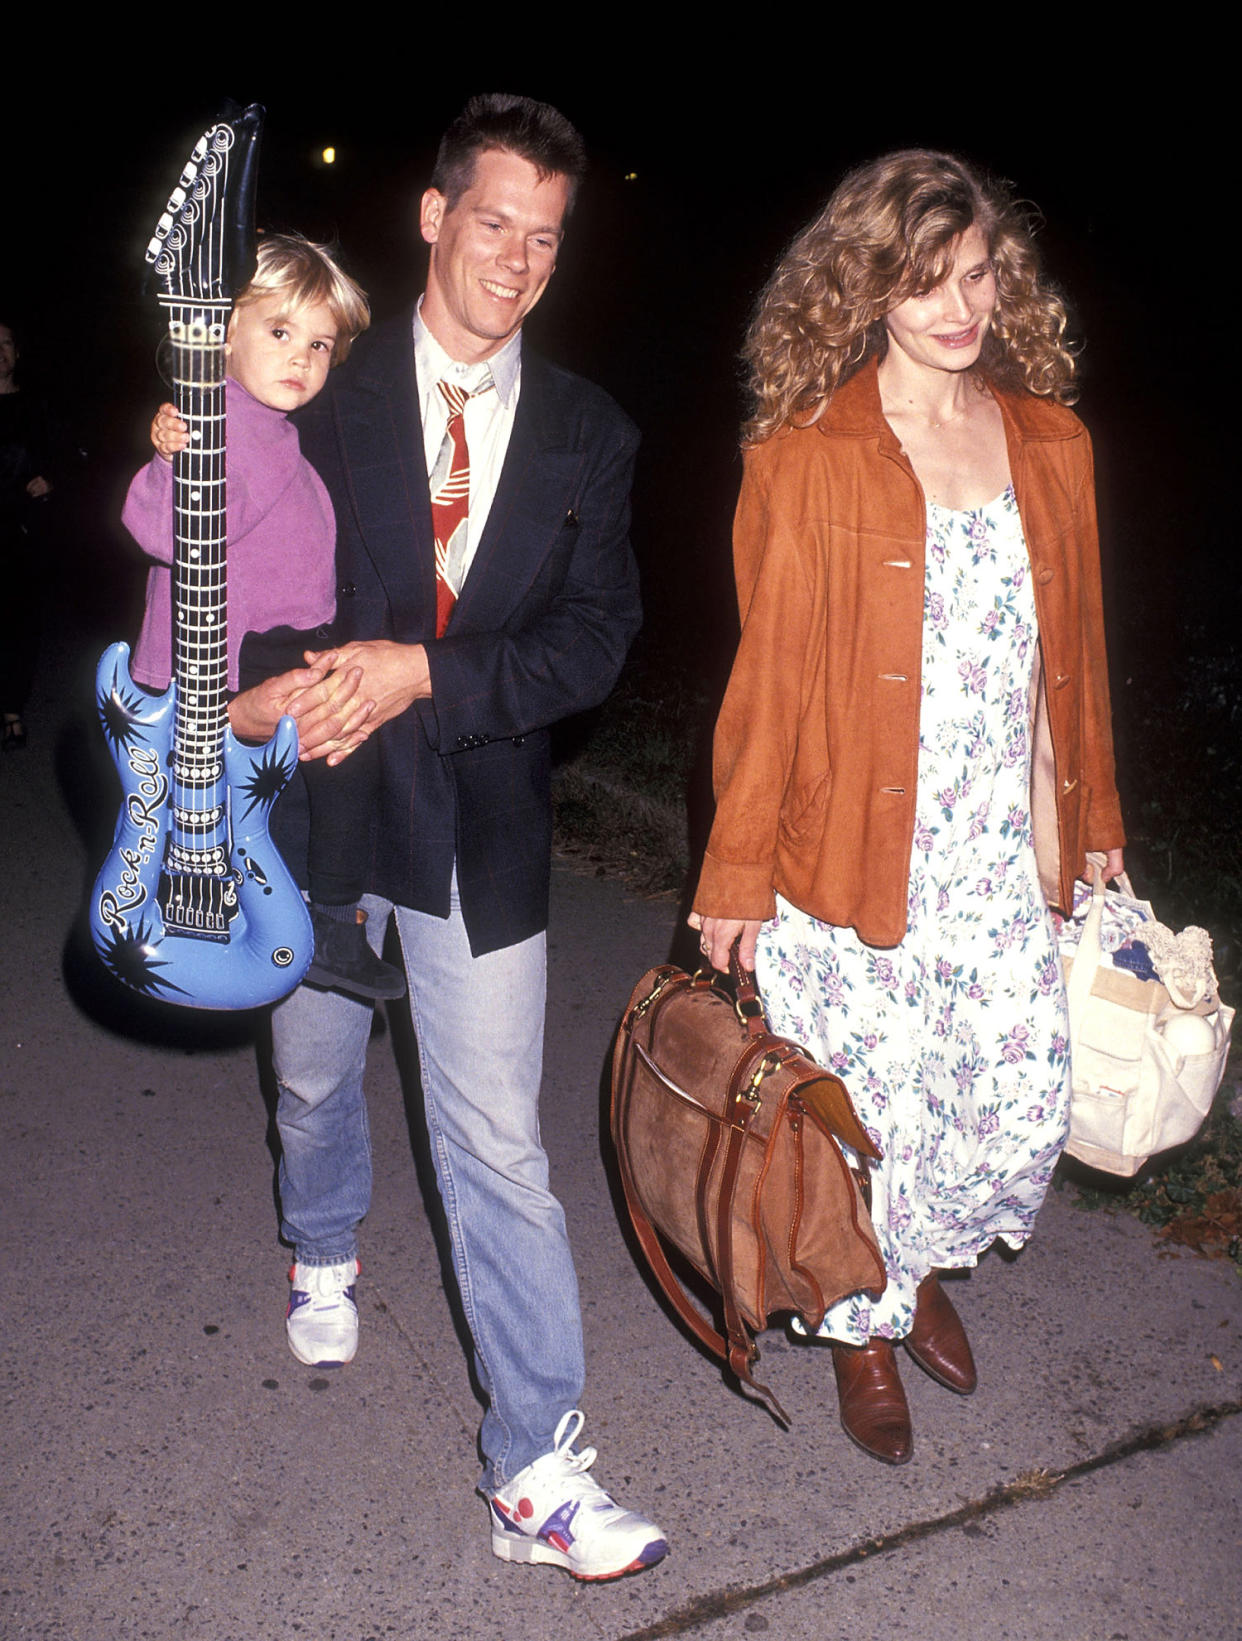 Kevin Bacon, wife Kyra Sedgwick and son Travis Bacon (Ron Galella / Getty Images)